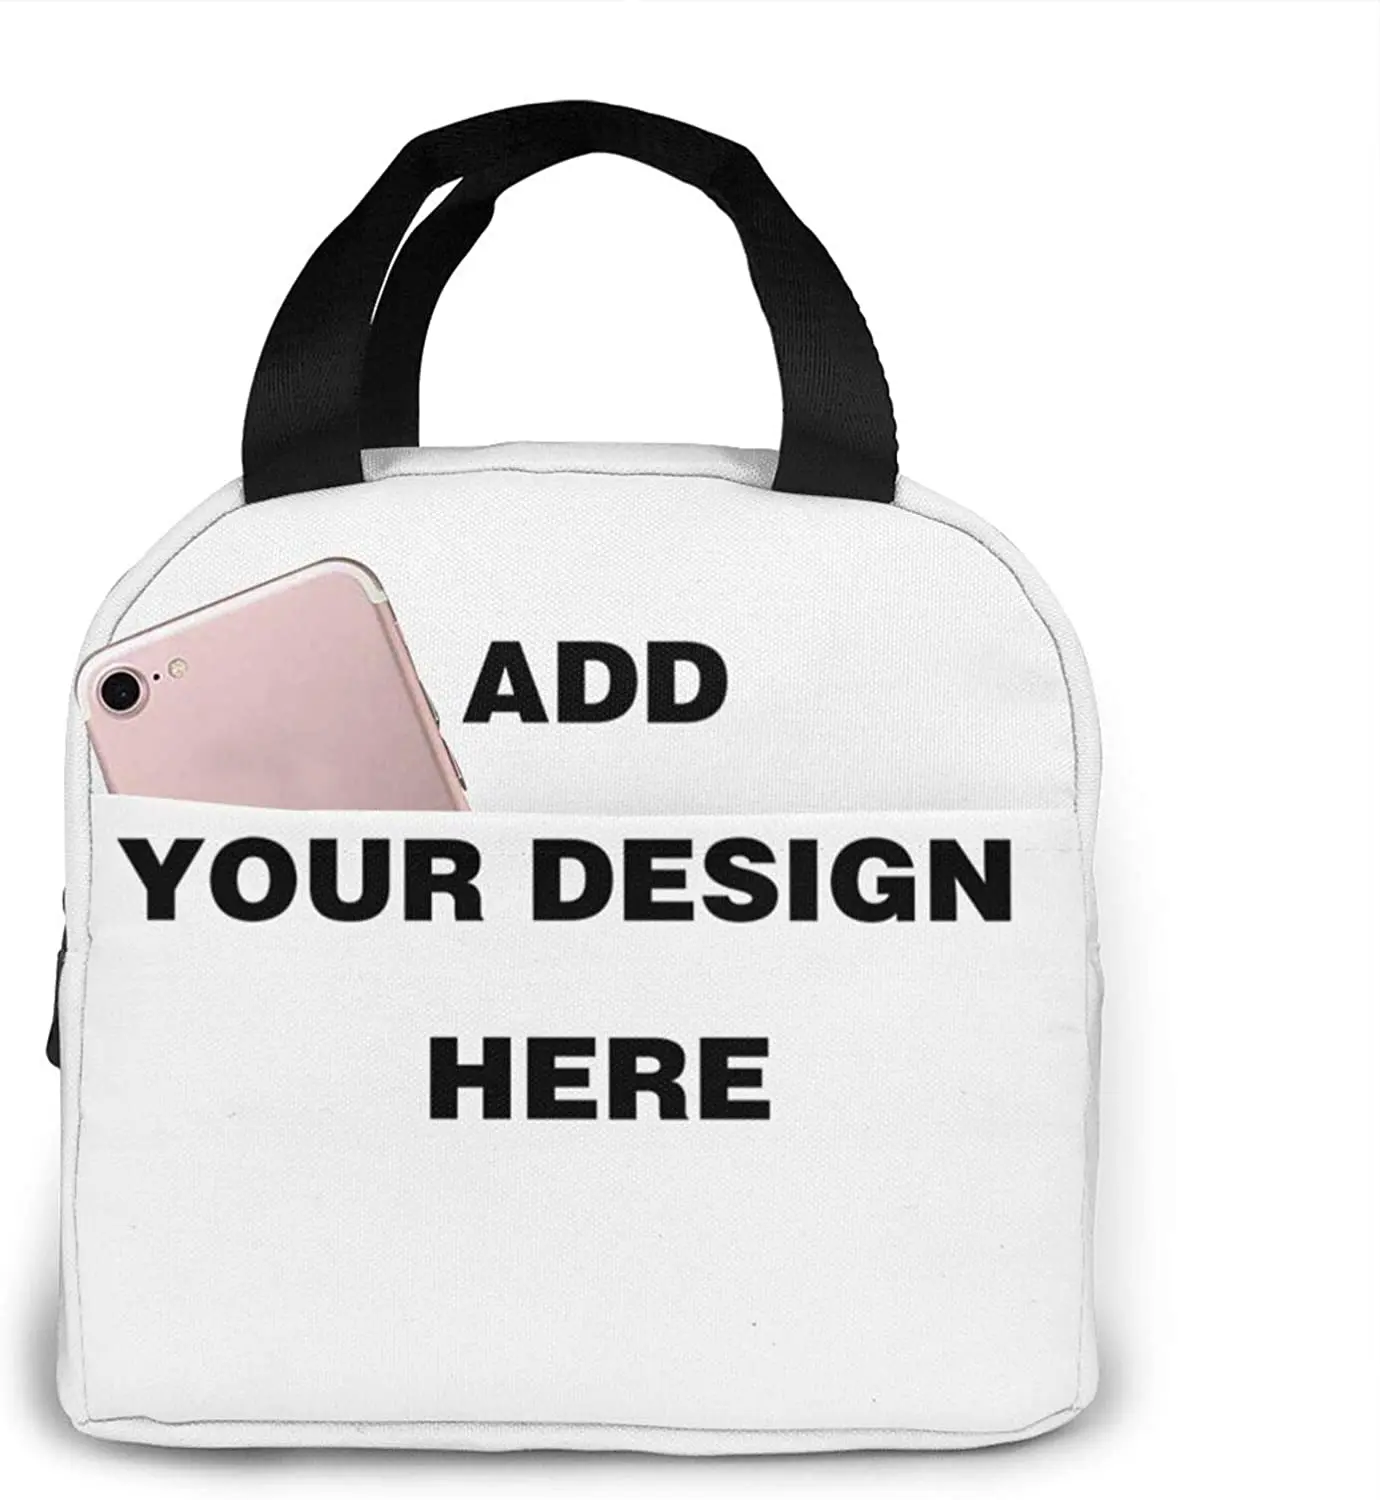 

Custom Lunch Box Insulated Bag, Personalized Add Your Image Text Portable Reusable Insulated Print Totes, for School Or Work